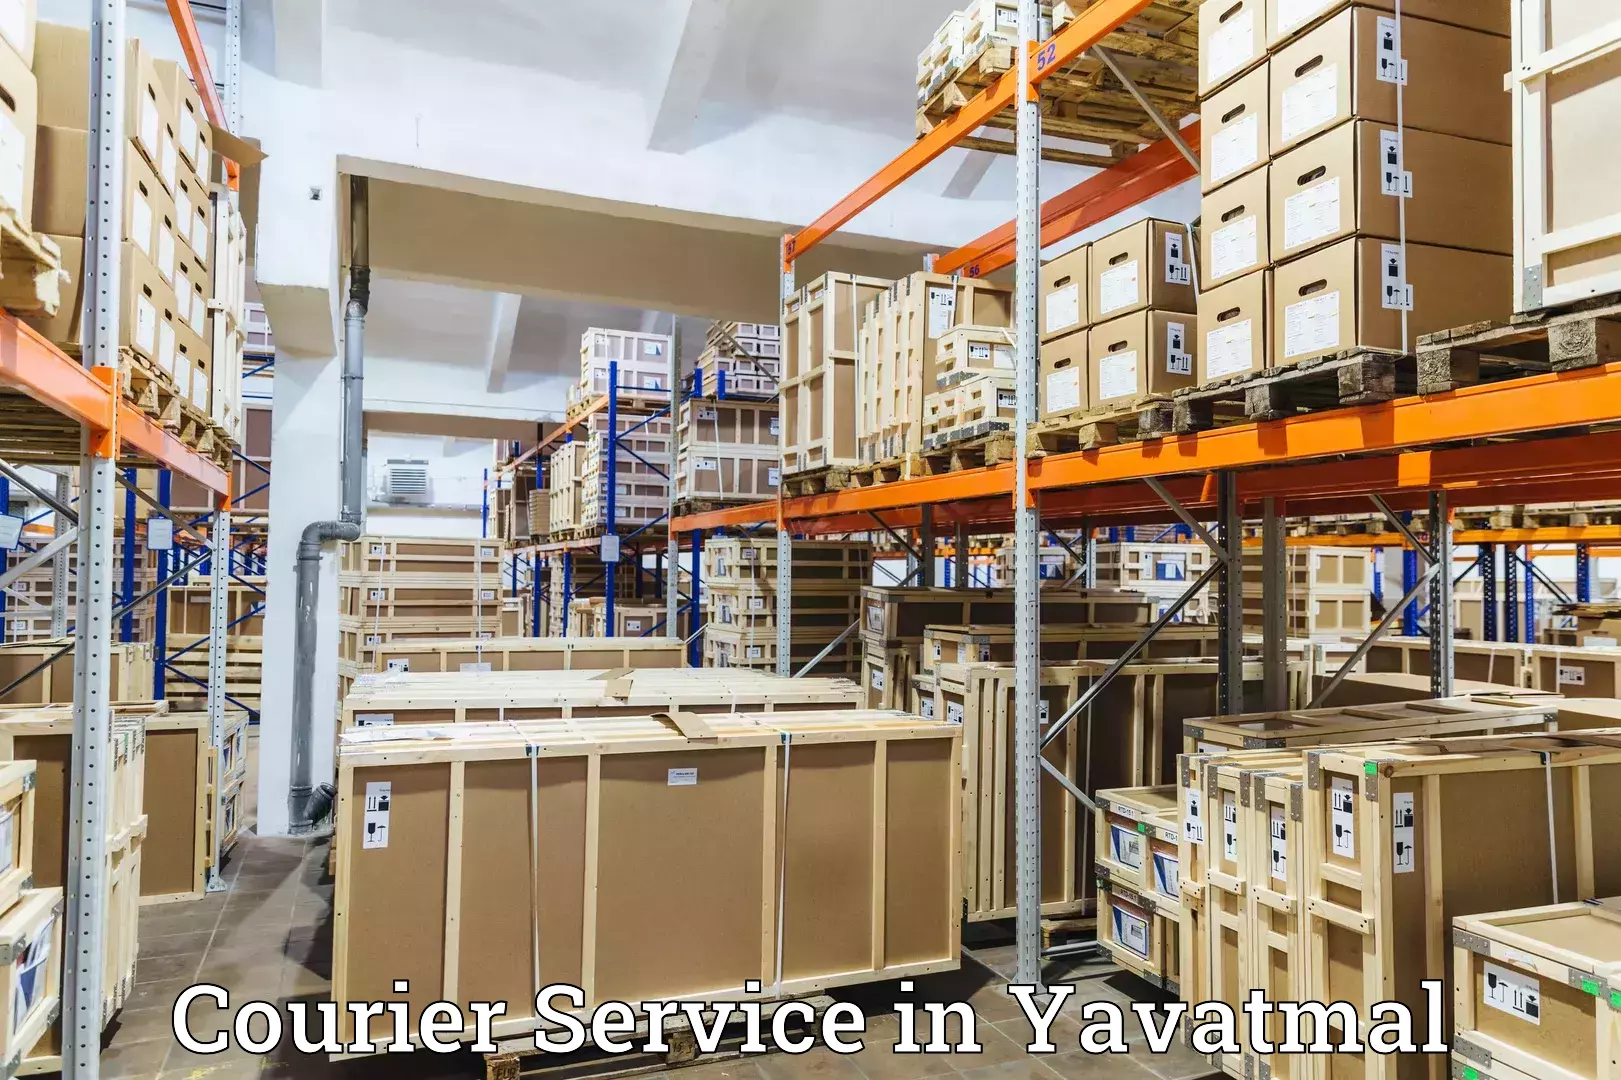 Customer-oriented courier services in Yavatmal